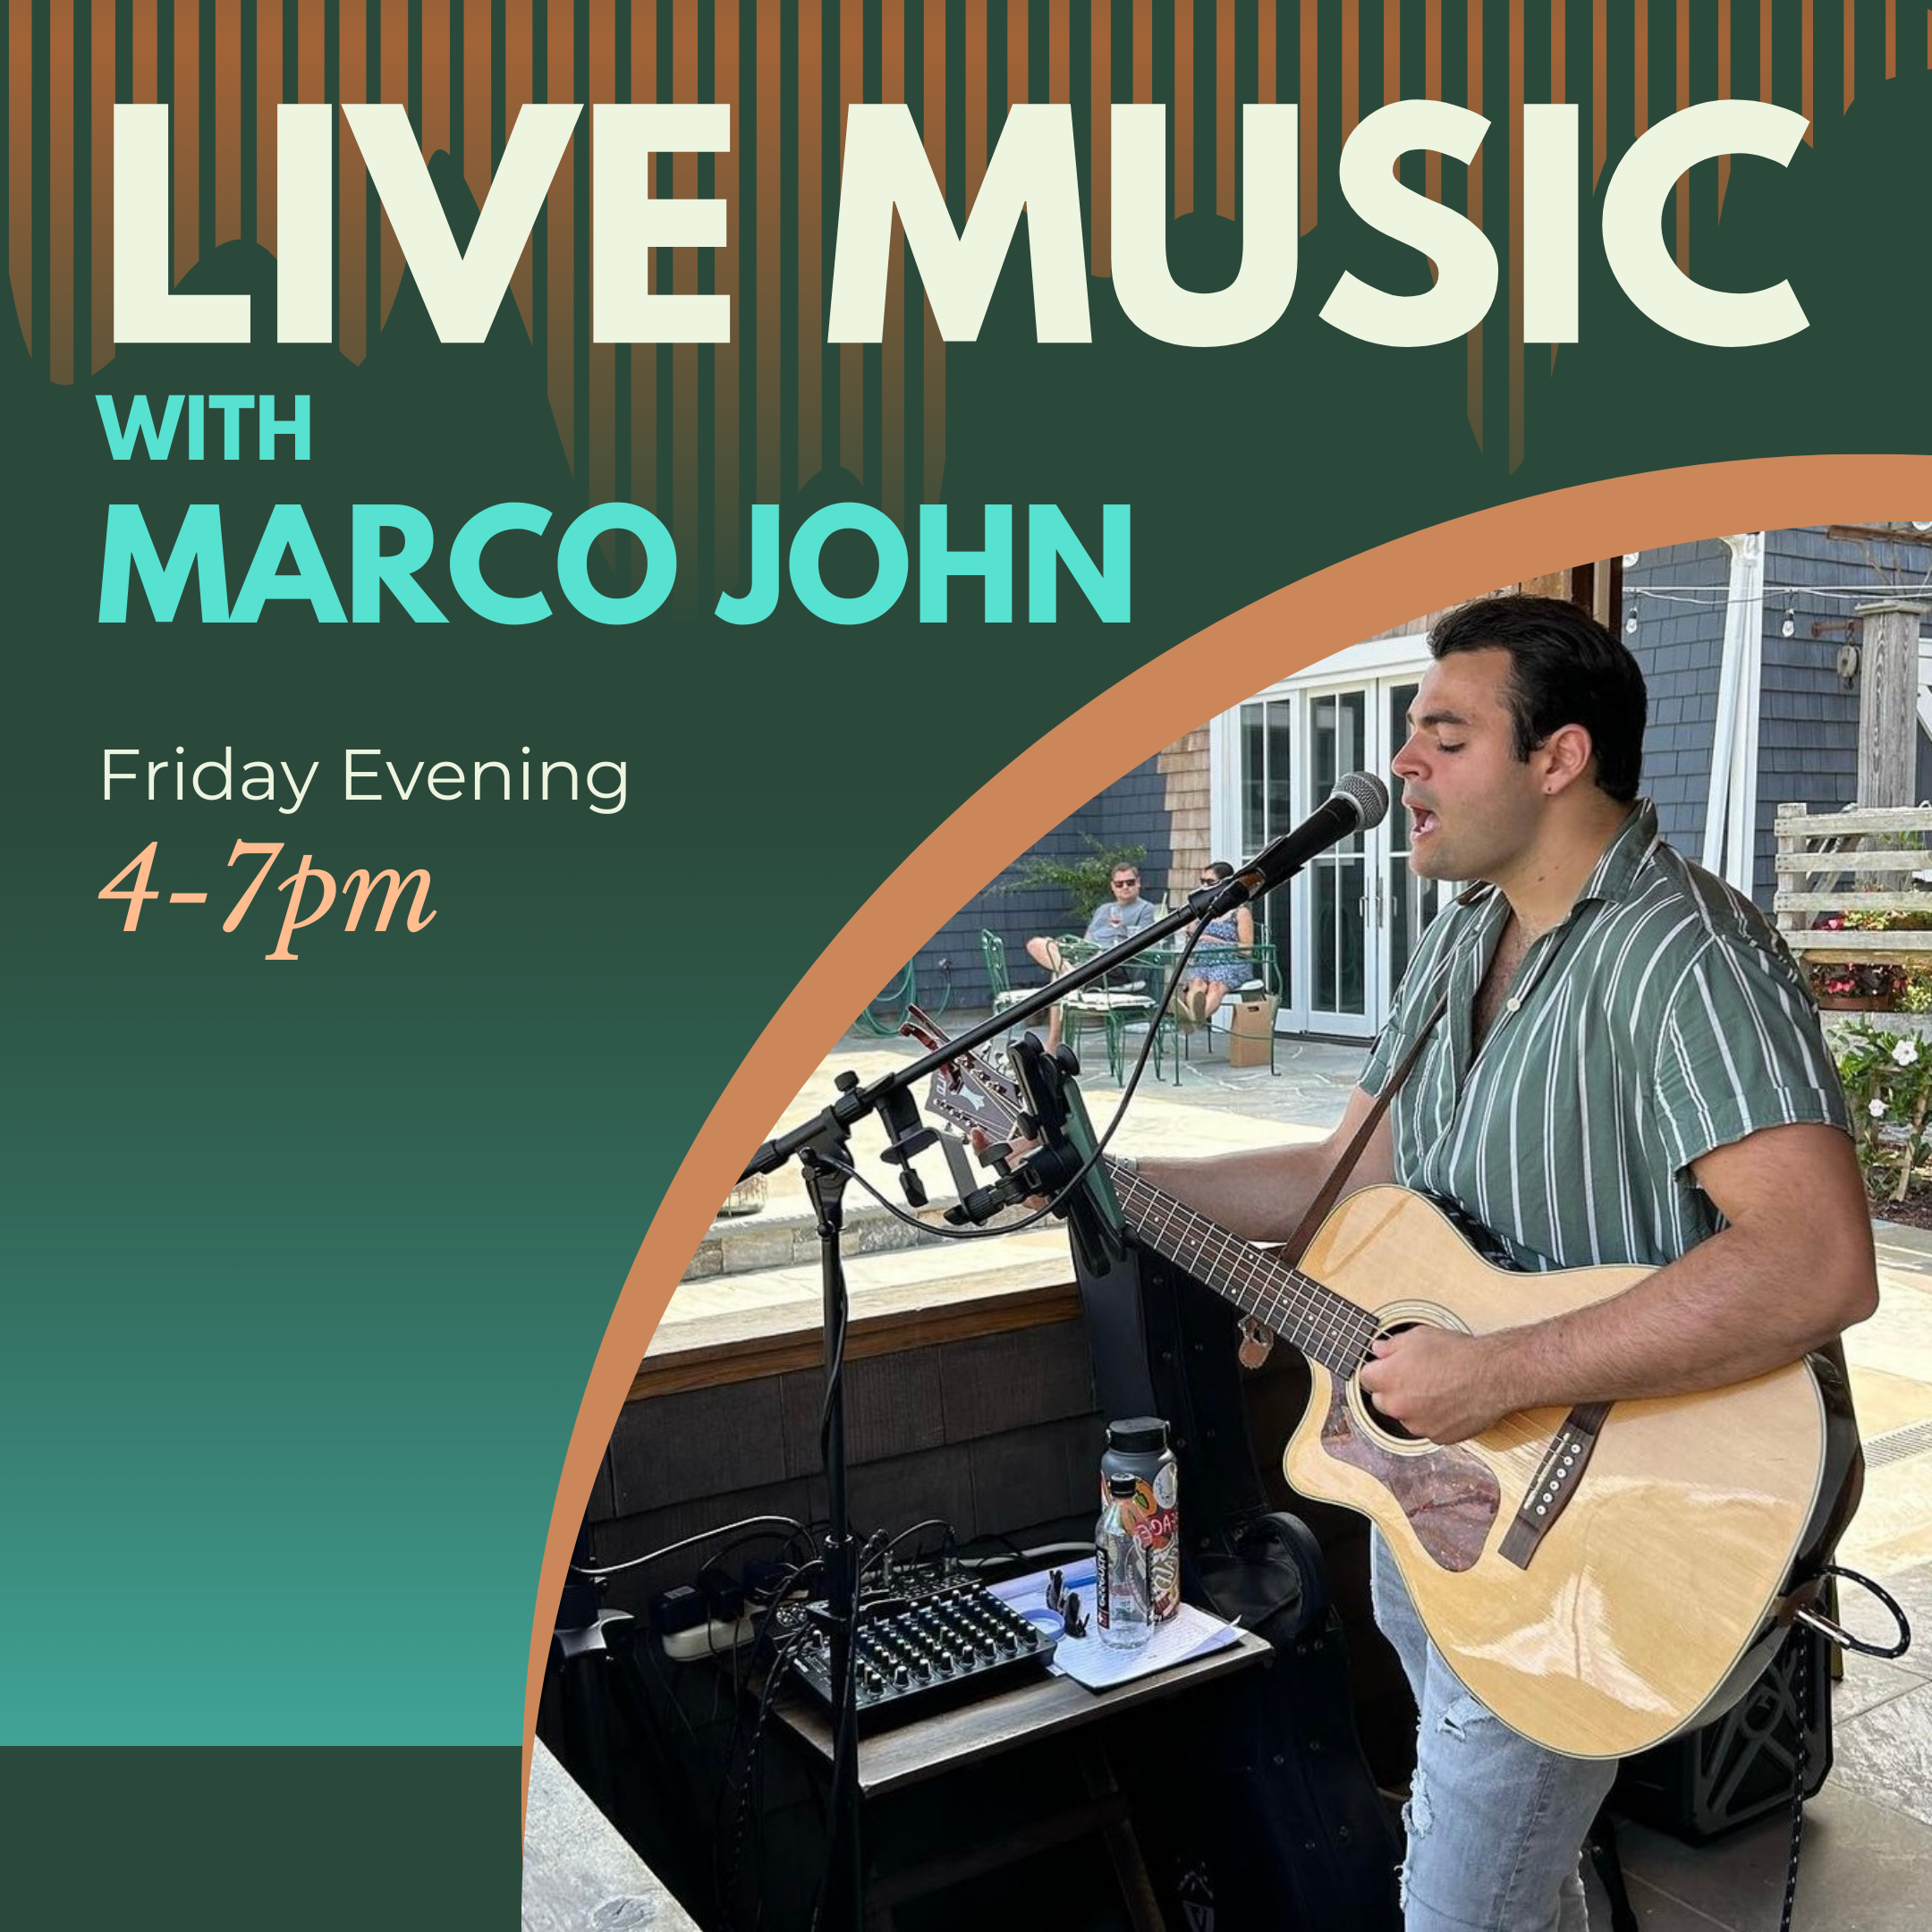 LIVE MUSIC from 4-7pm this Friday!